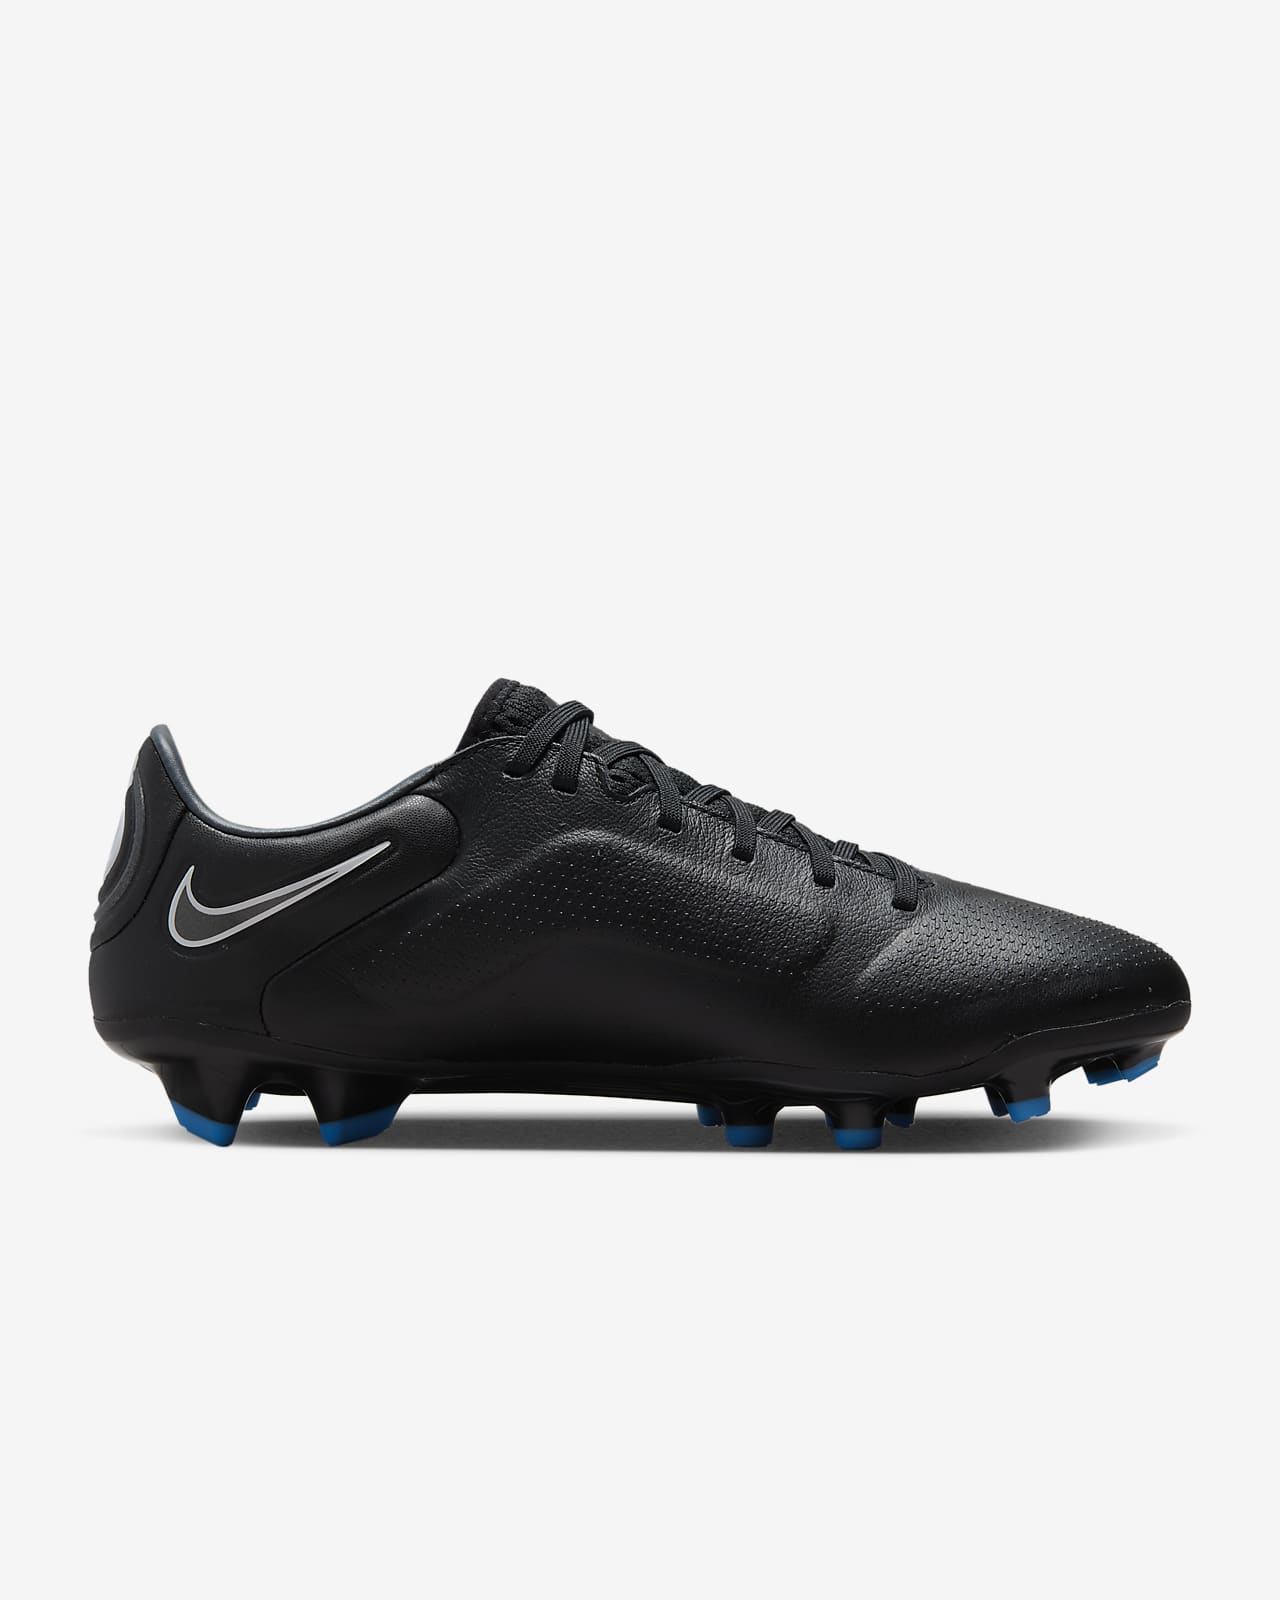 Nike Tiempo Legend 9 Pro FG Firm-Ground Football Boot. Nike